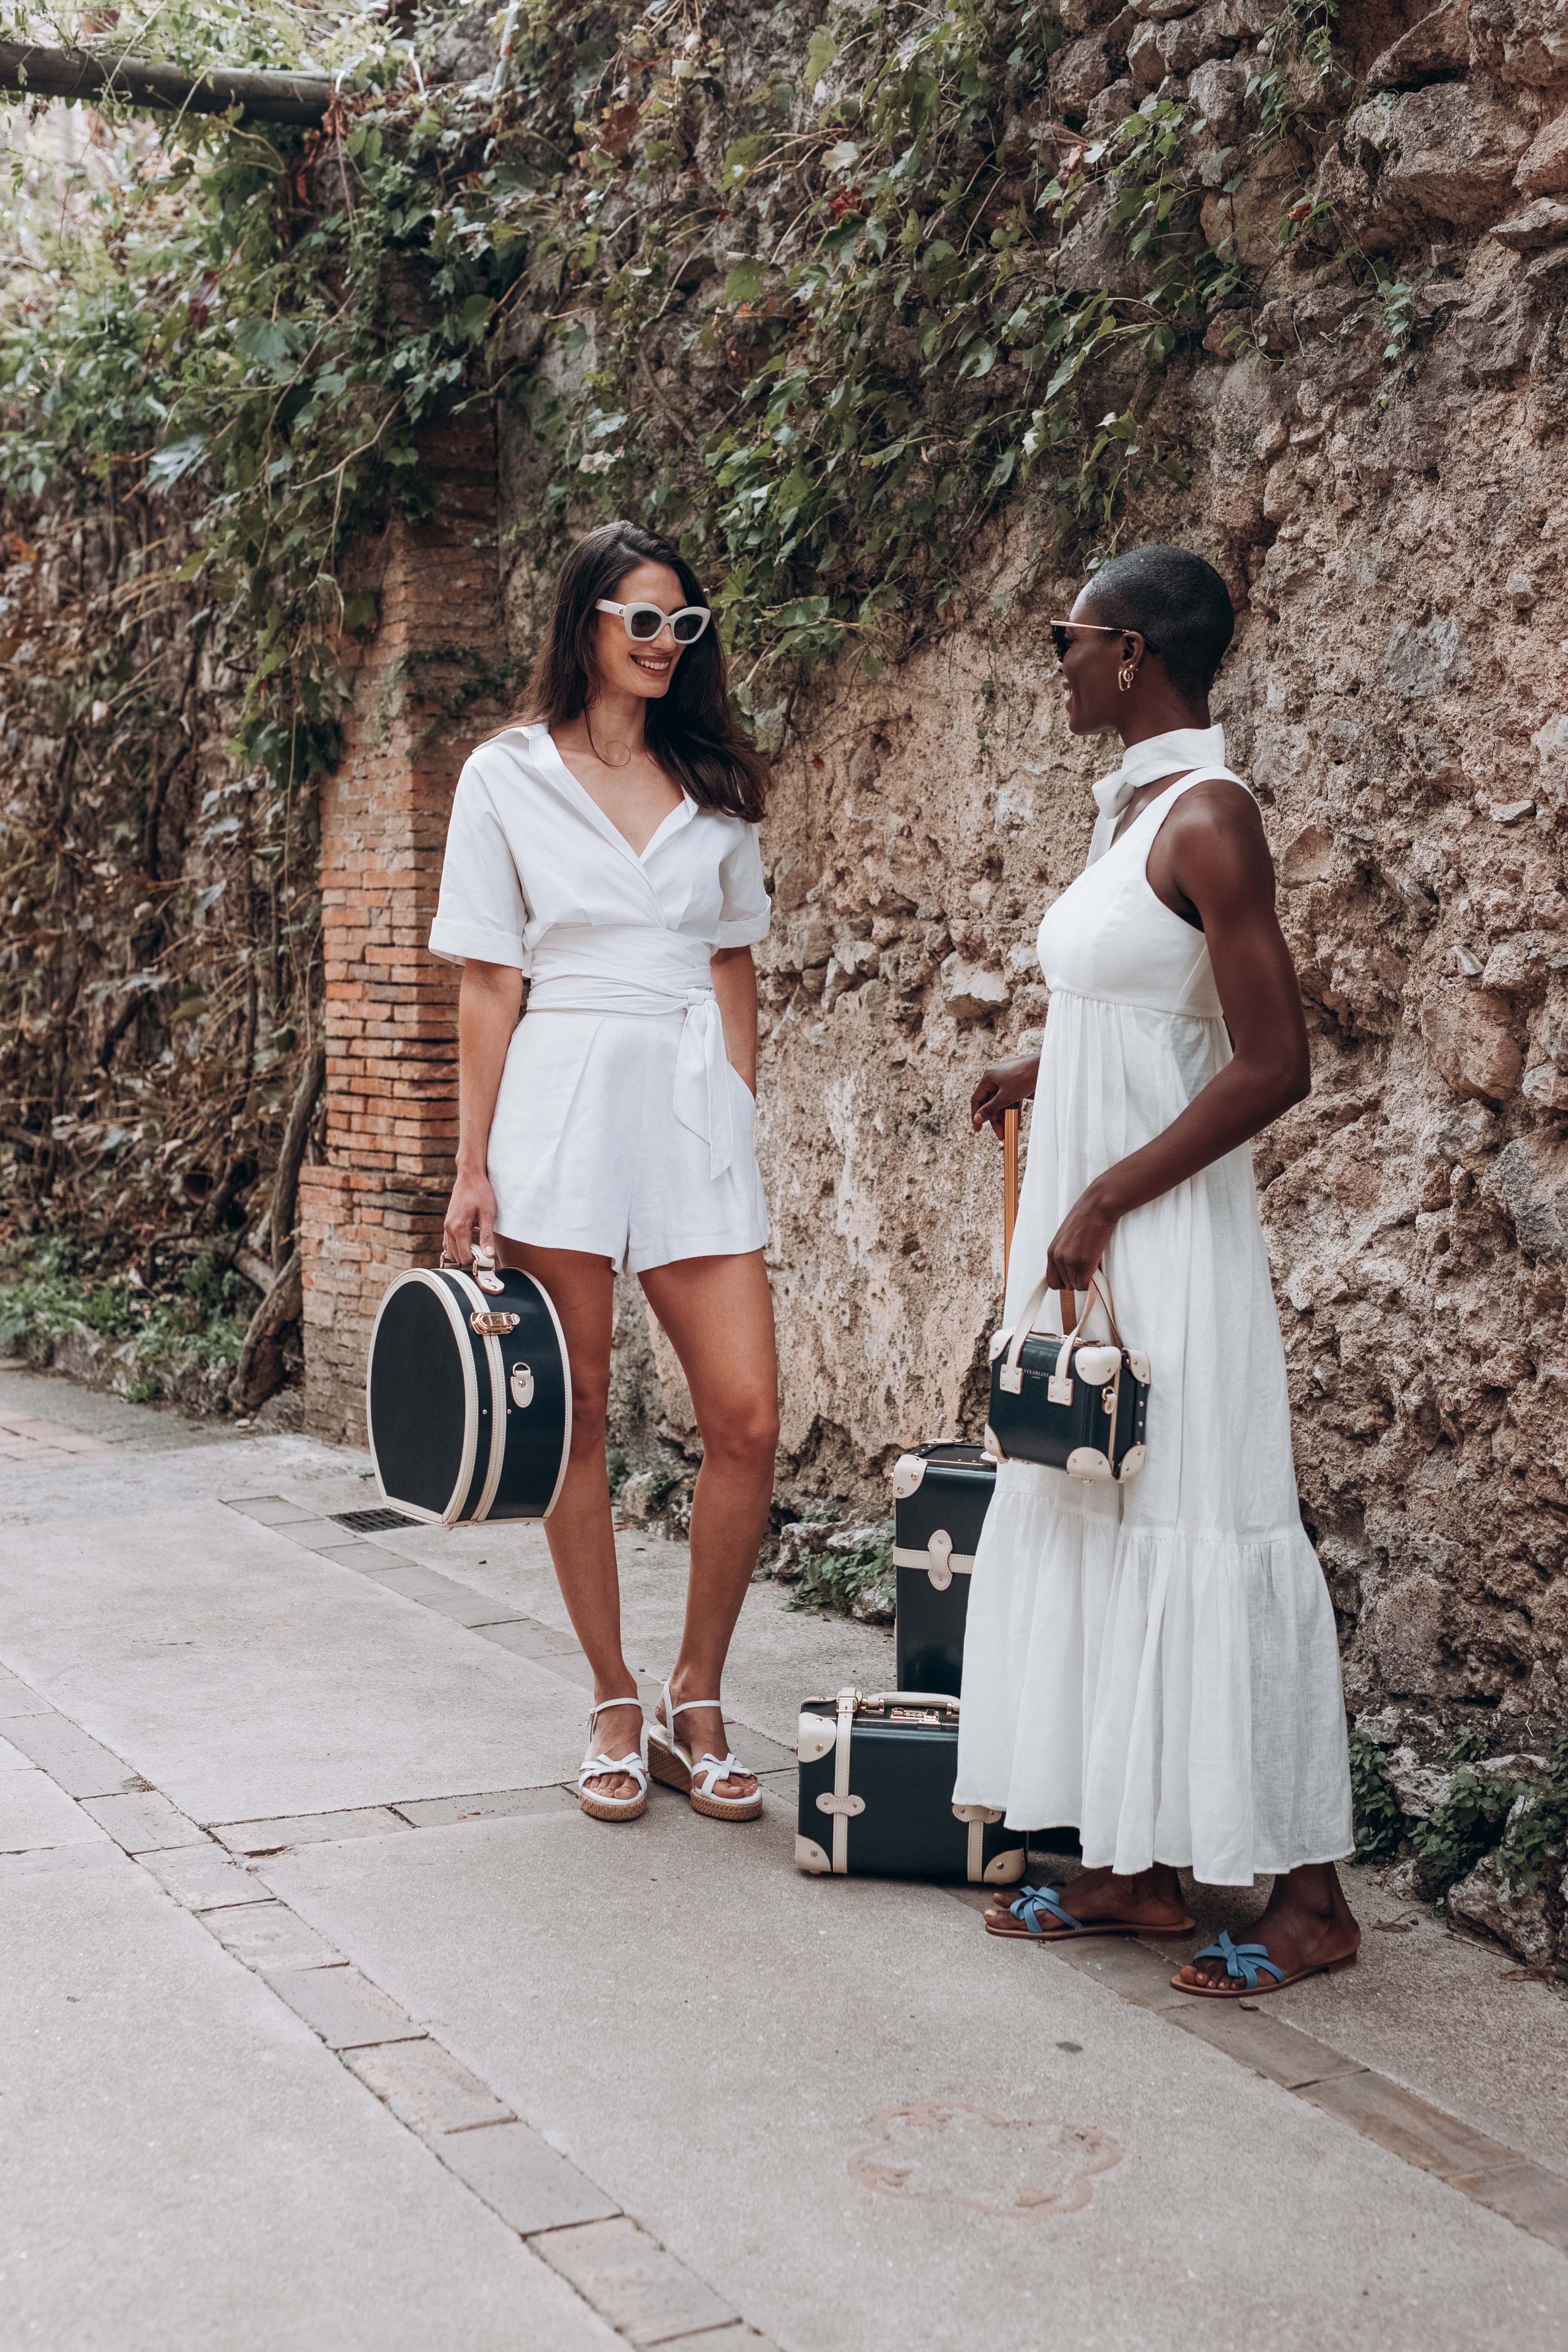 Women standing with vintage style luggage